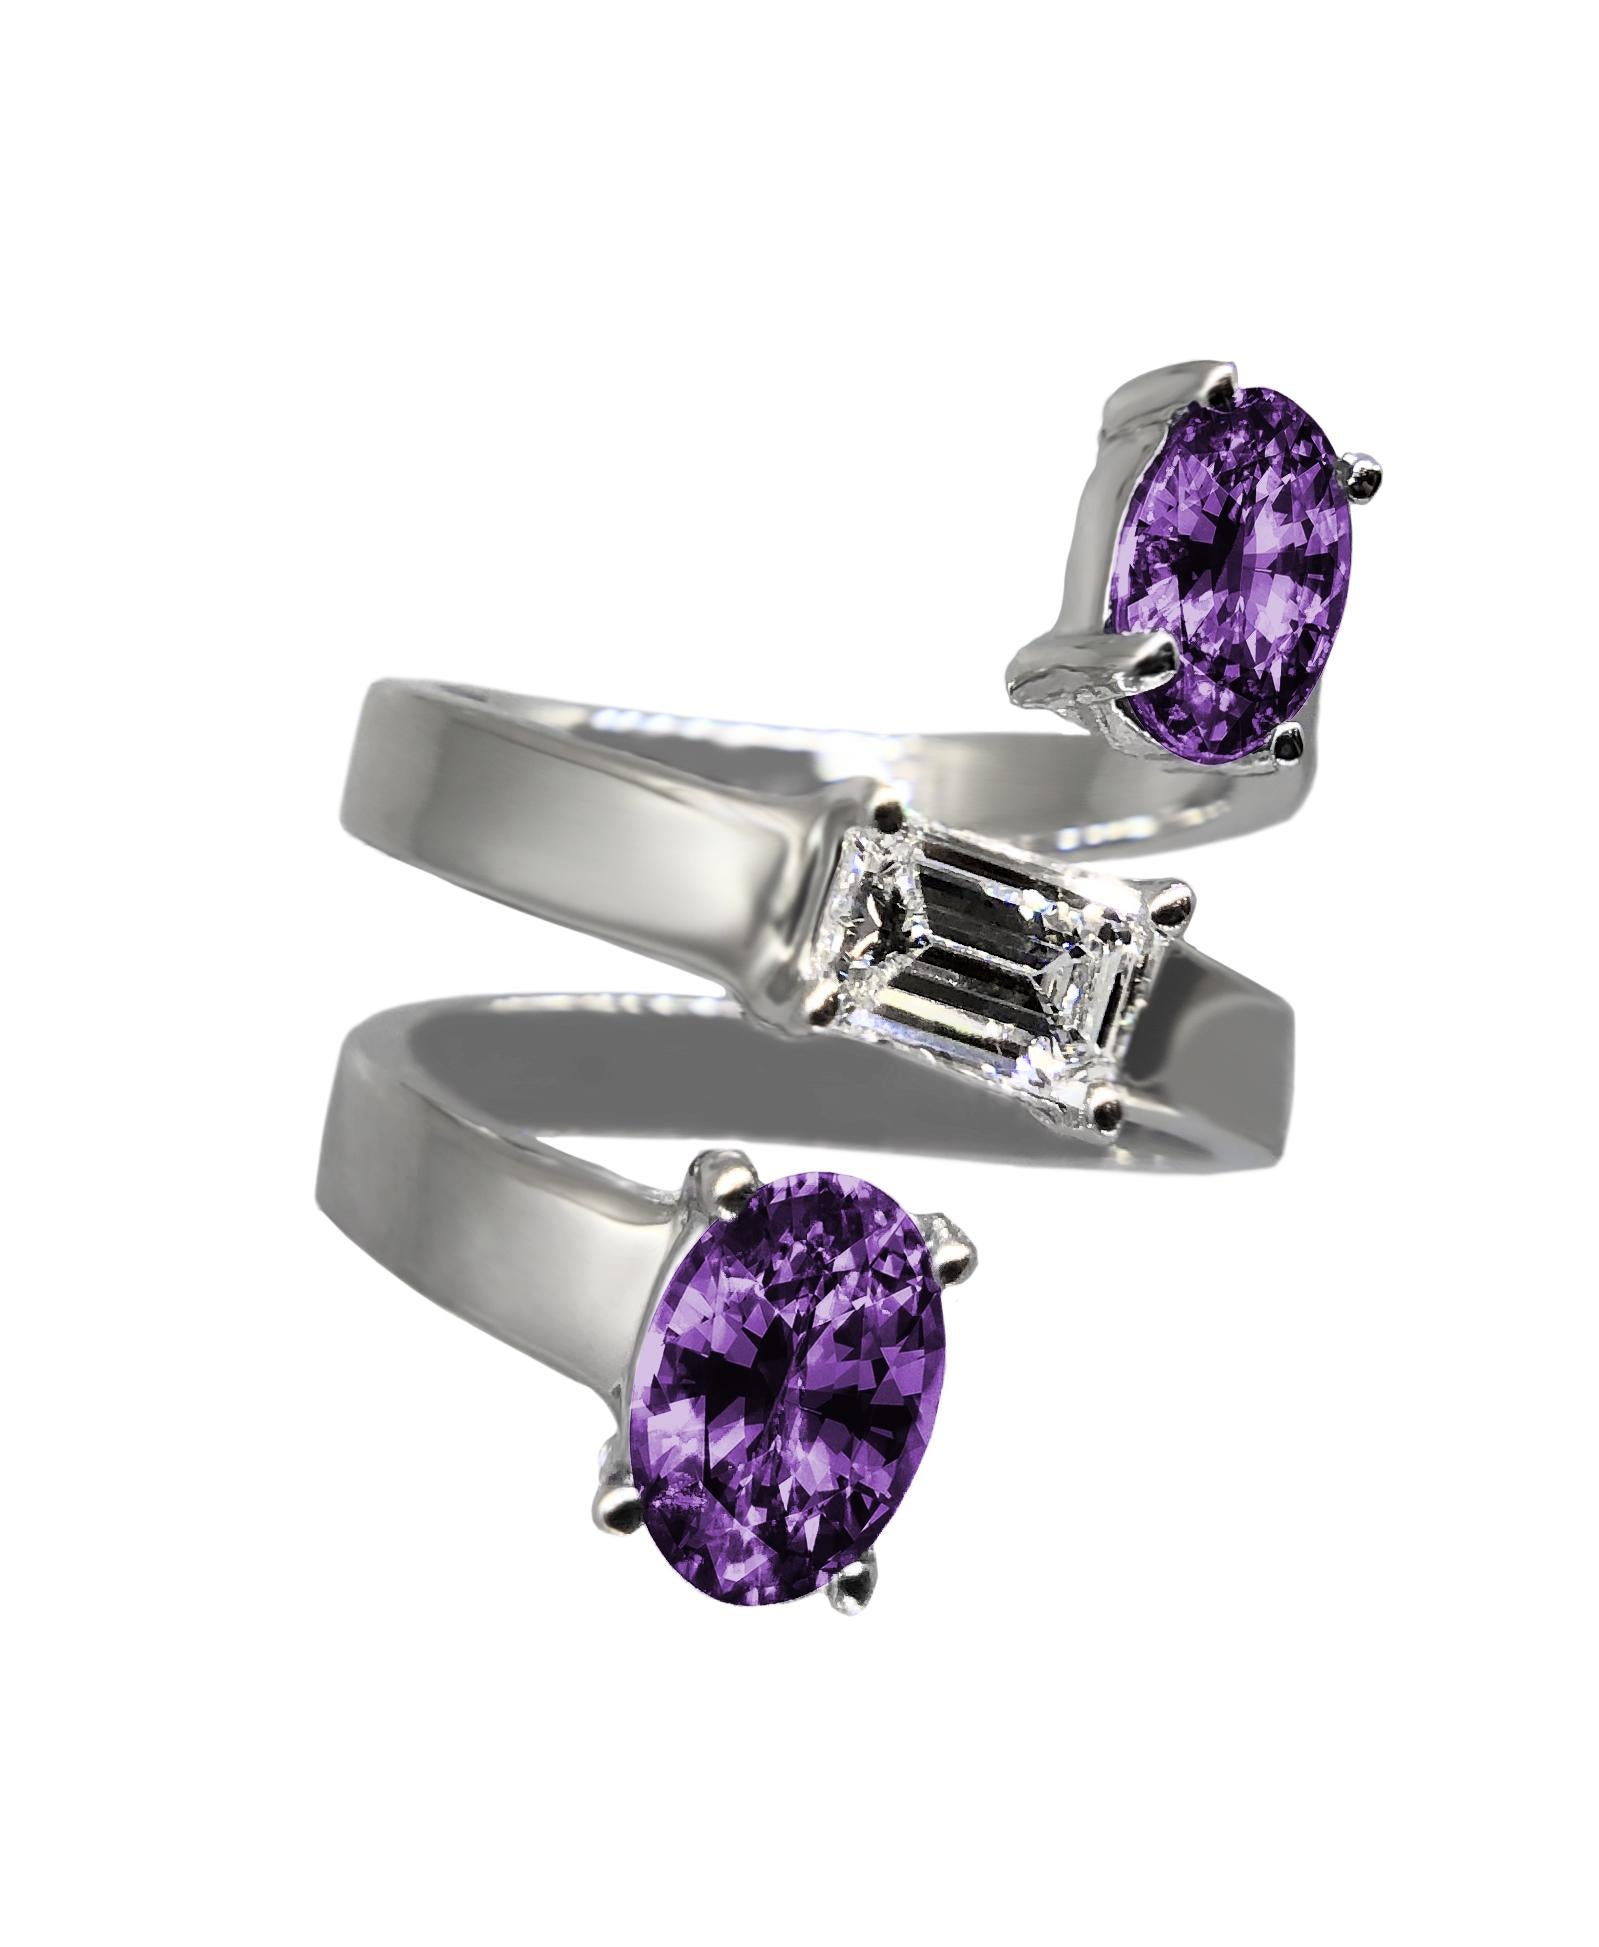 An exceptional and impressive ring by the American high jewelry designer, Drew Pietrafesa. Mounted in 18K white gold, a VS quality emerald-cut diamond is joined by two purple oval amethyst gemstones. This snake ring will wrap your finger in